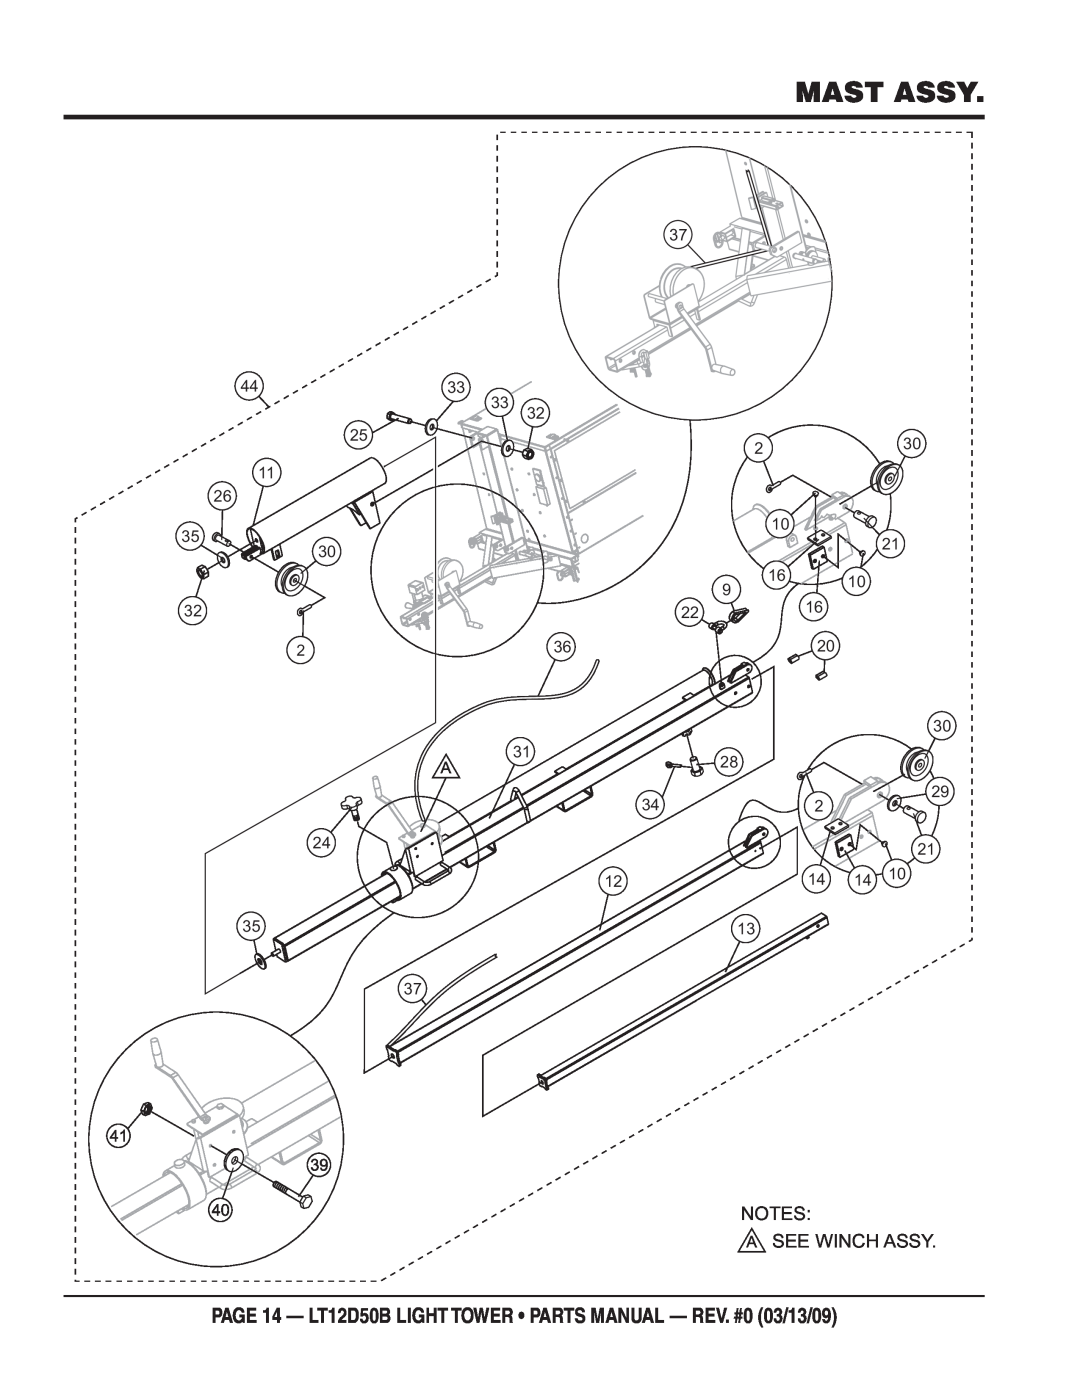 Multiquip manual Mast Assy, PAGE 14 - LT12D50B LIGHT TOWER PARTS MANUAL - REV. #0 03/13/09, A See Winch Assy 